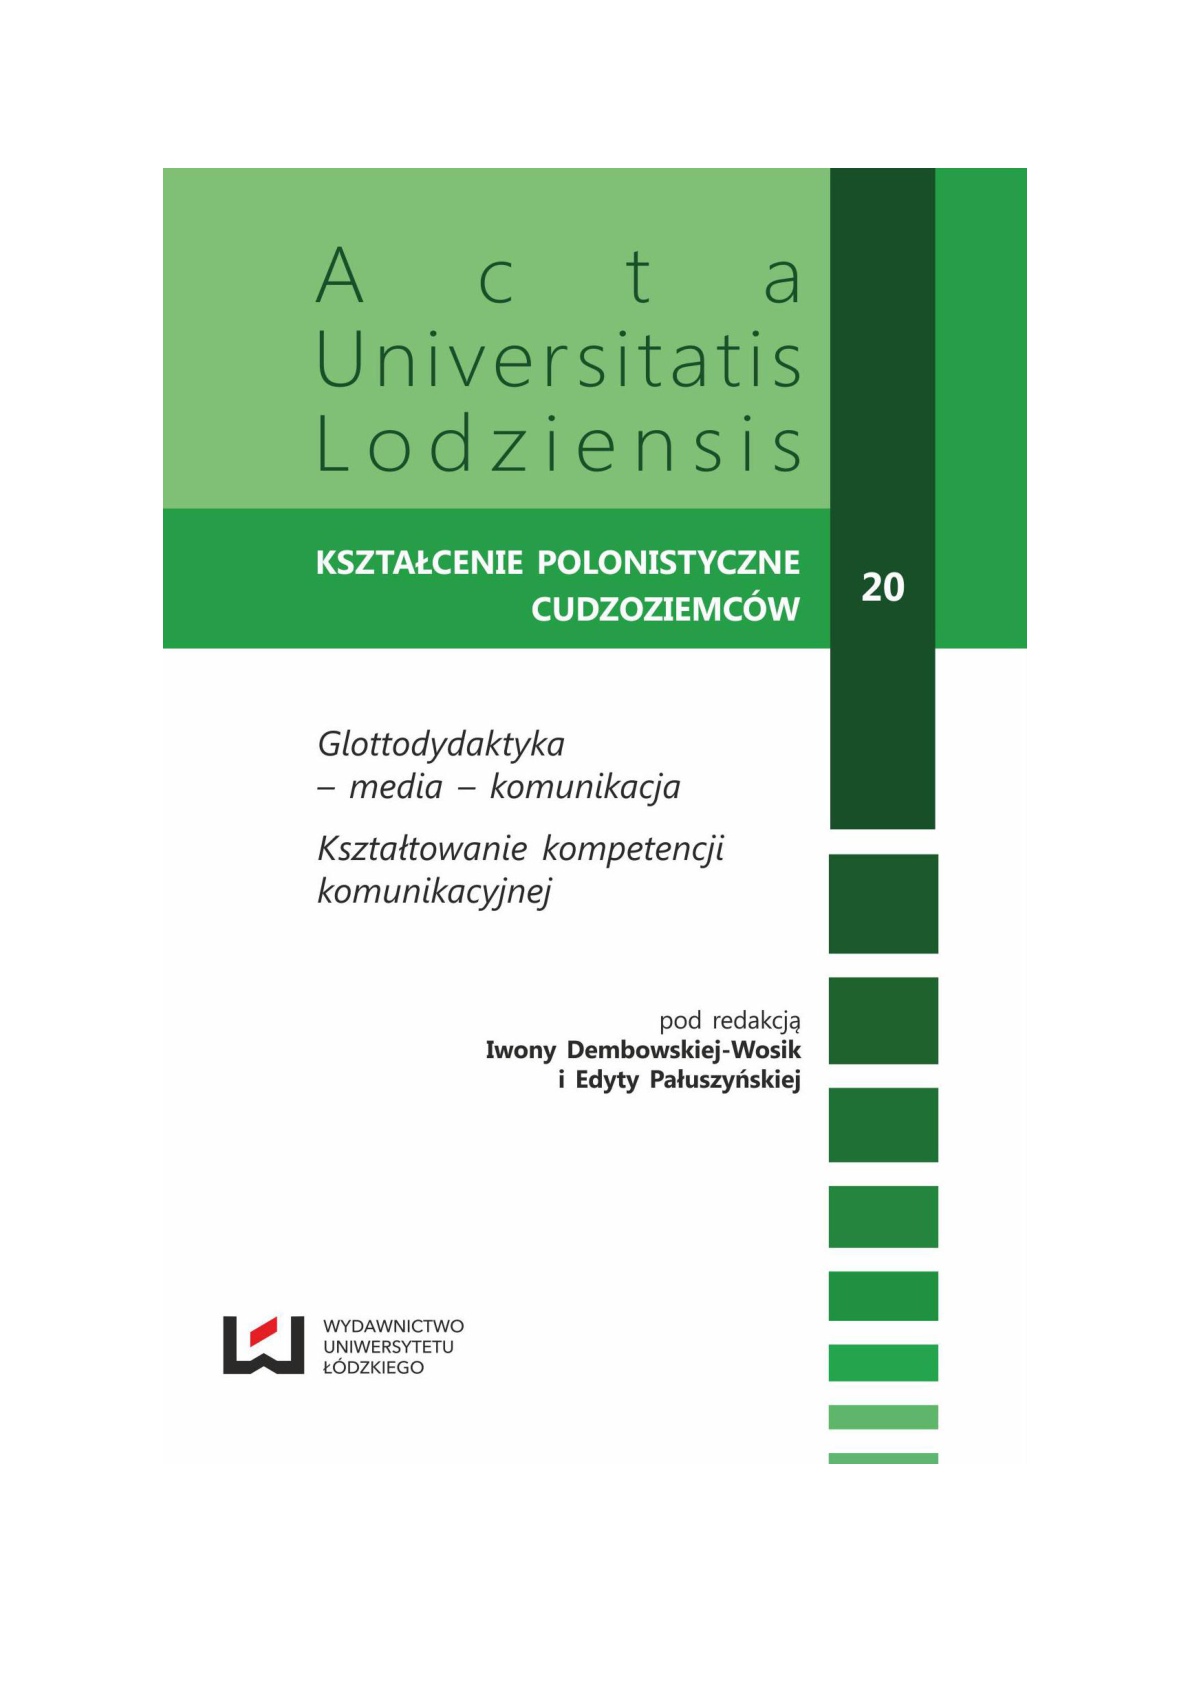 DIDACTIC VALUE OF A HYBRID TEXT IN FOREIGN LANGUAGE TEACHING: A SURVEY BASED ON RUSSIAN AND POLISH LANGUAGE MATERIAL Cover Image